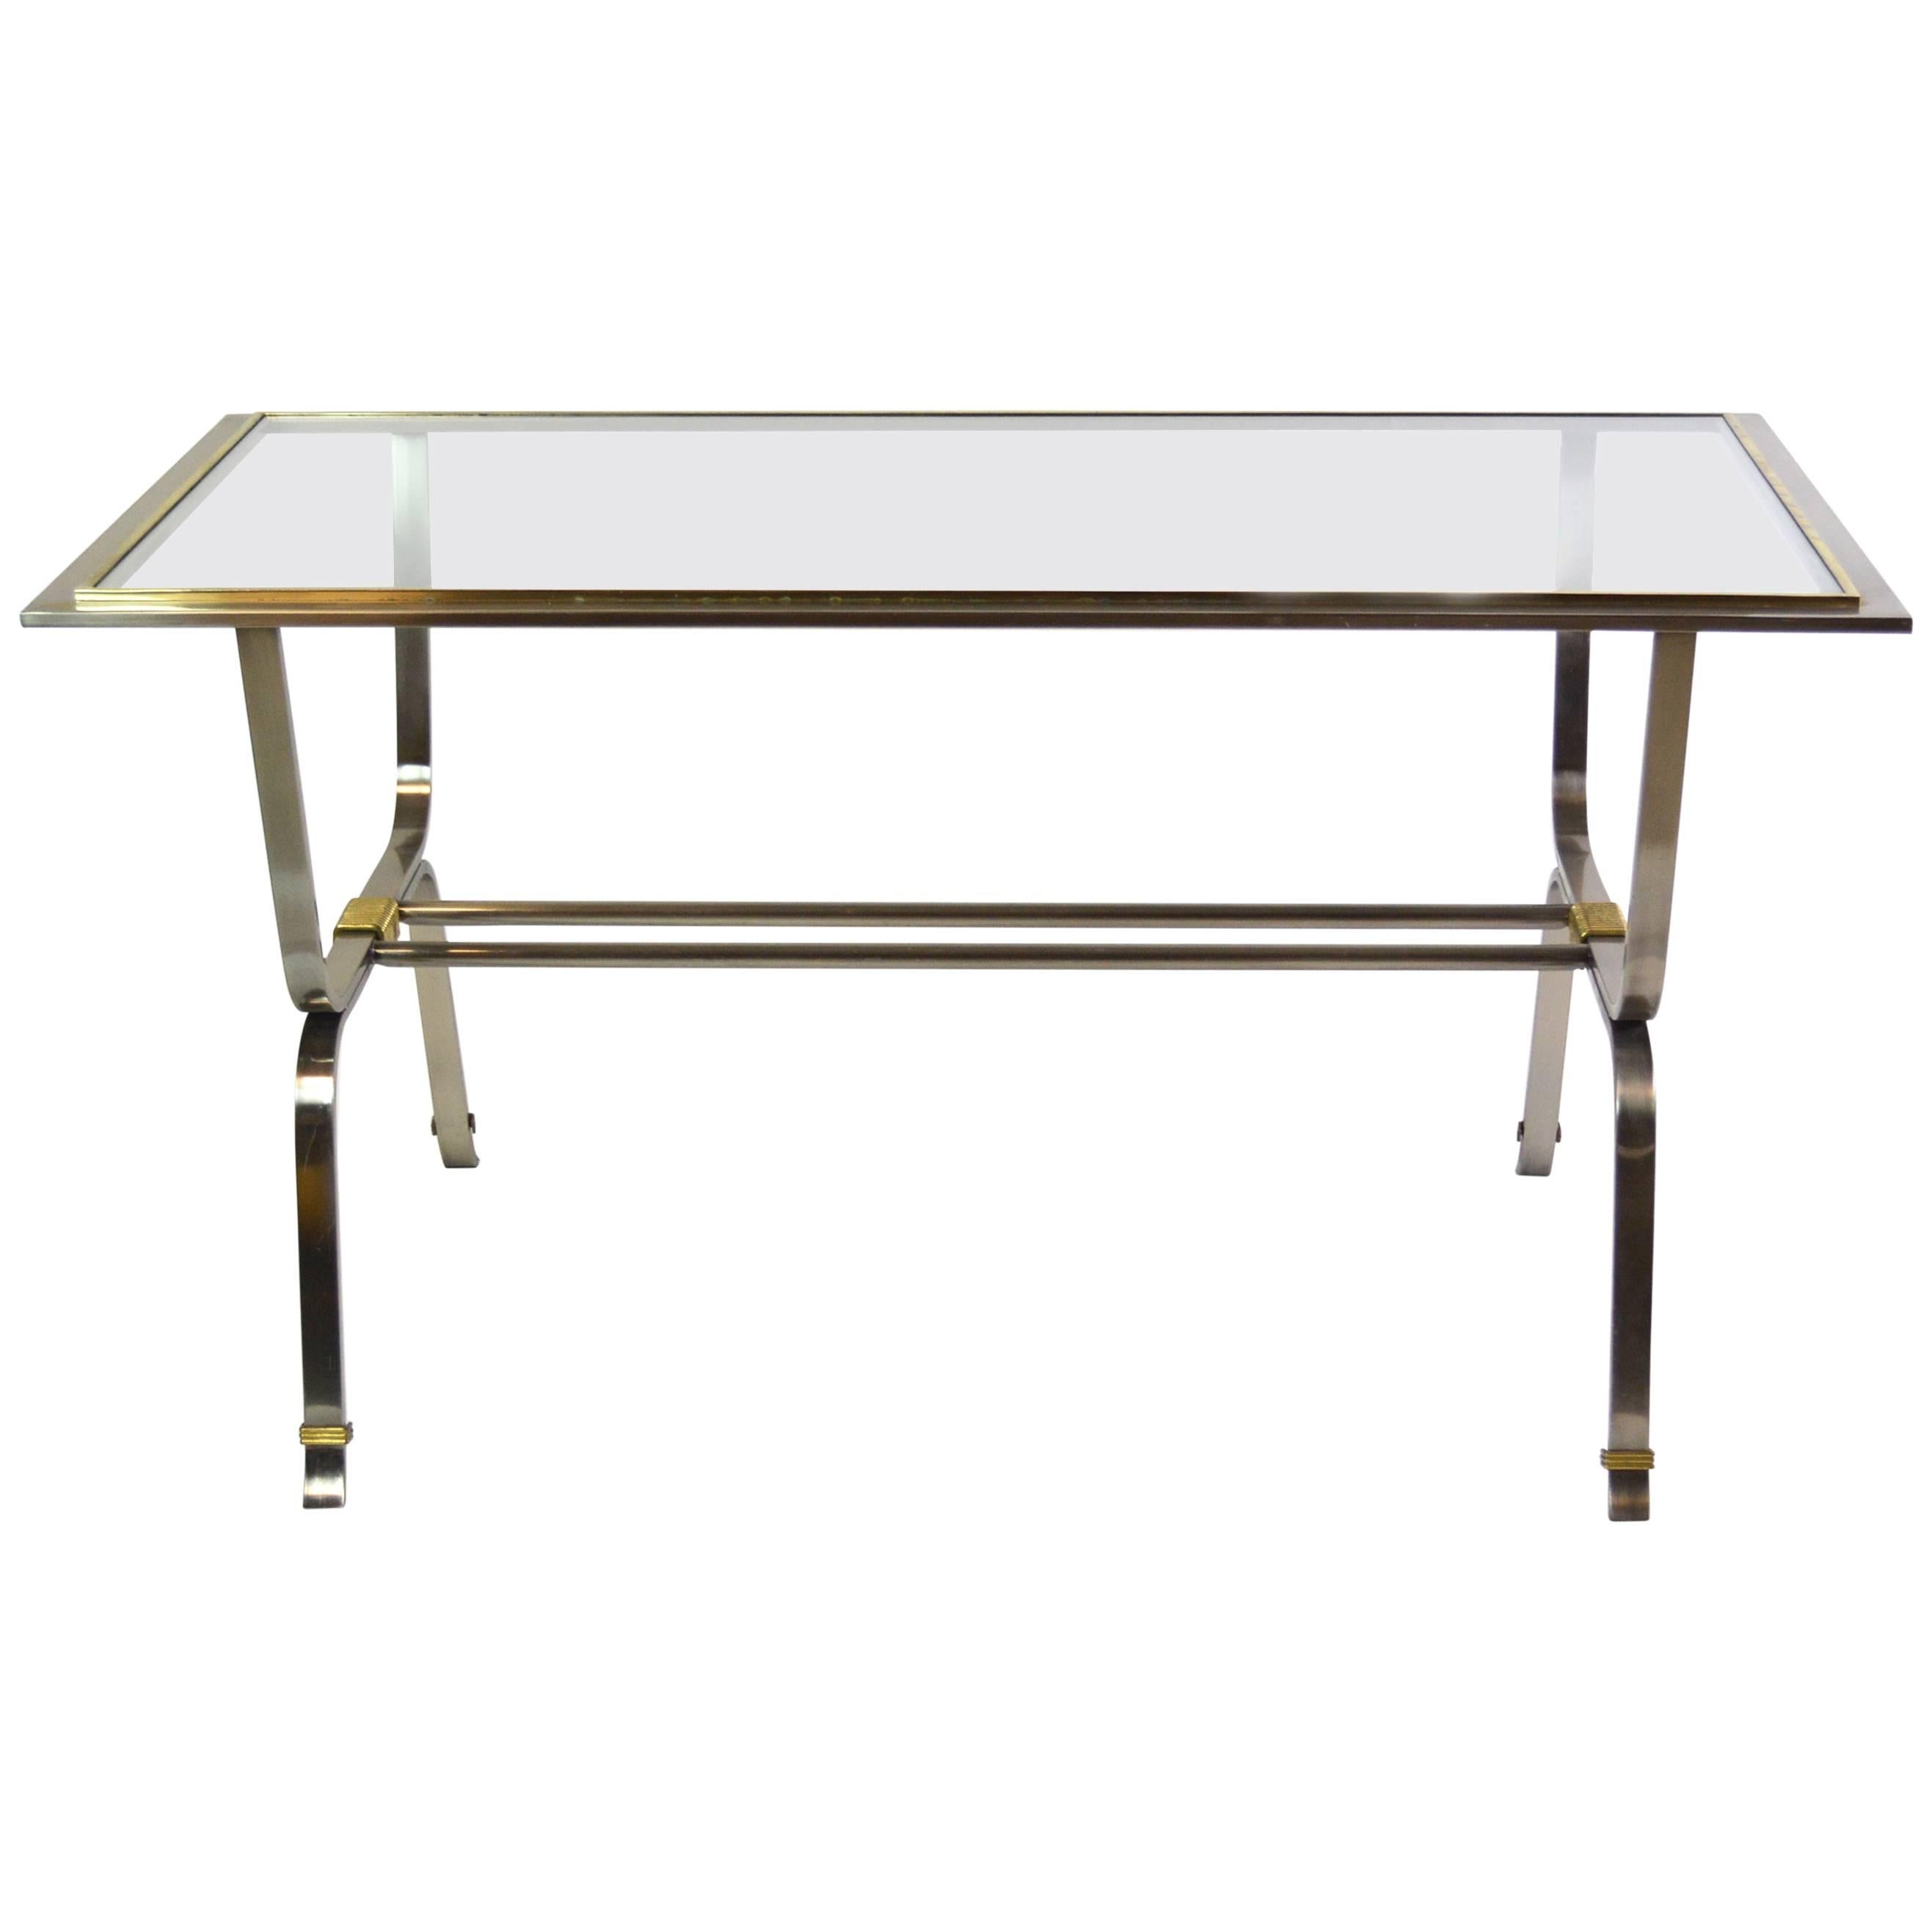 Italian Stainless Steel and Brass Desk Table